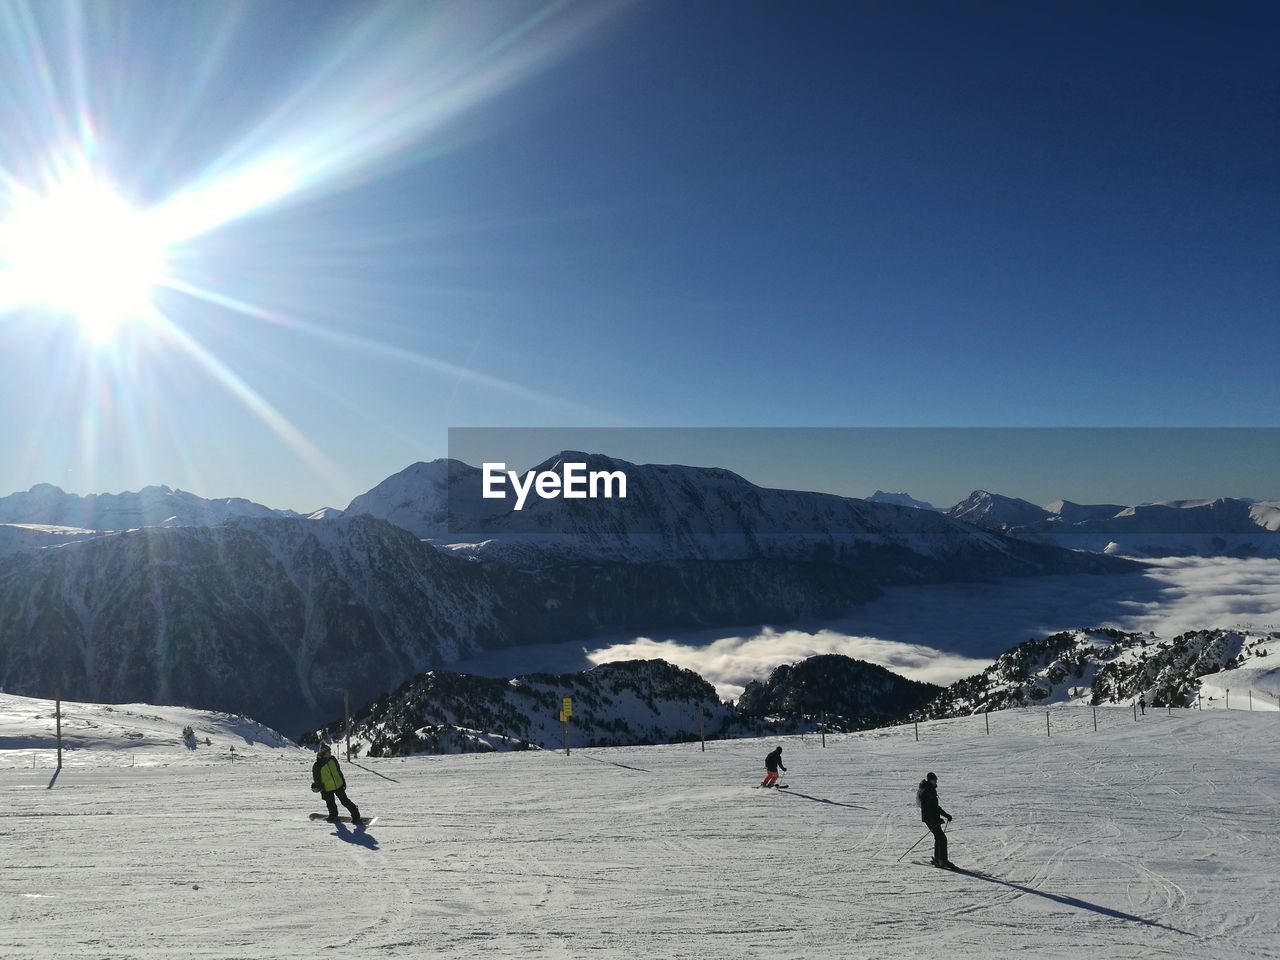 People skiing on snow by mountains against blue sky